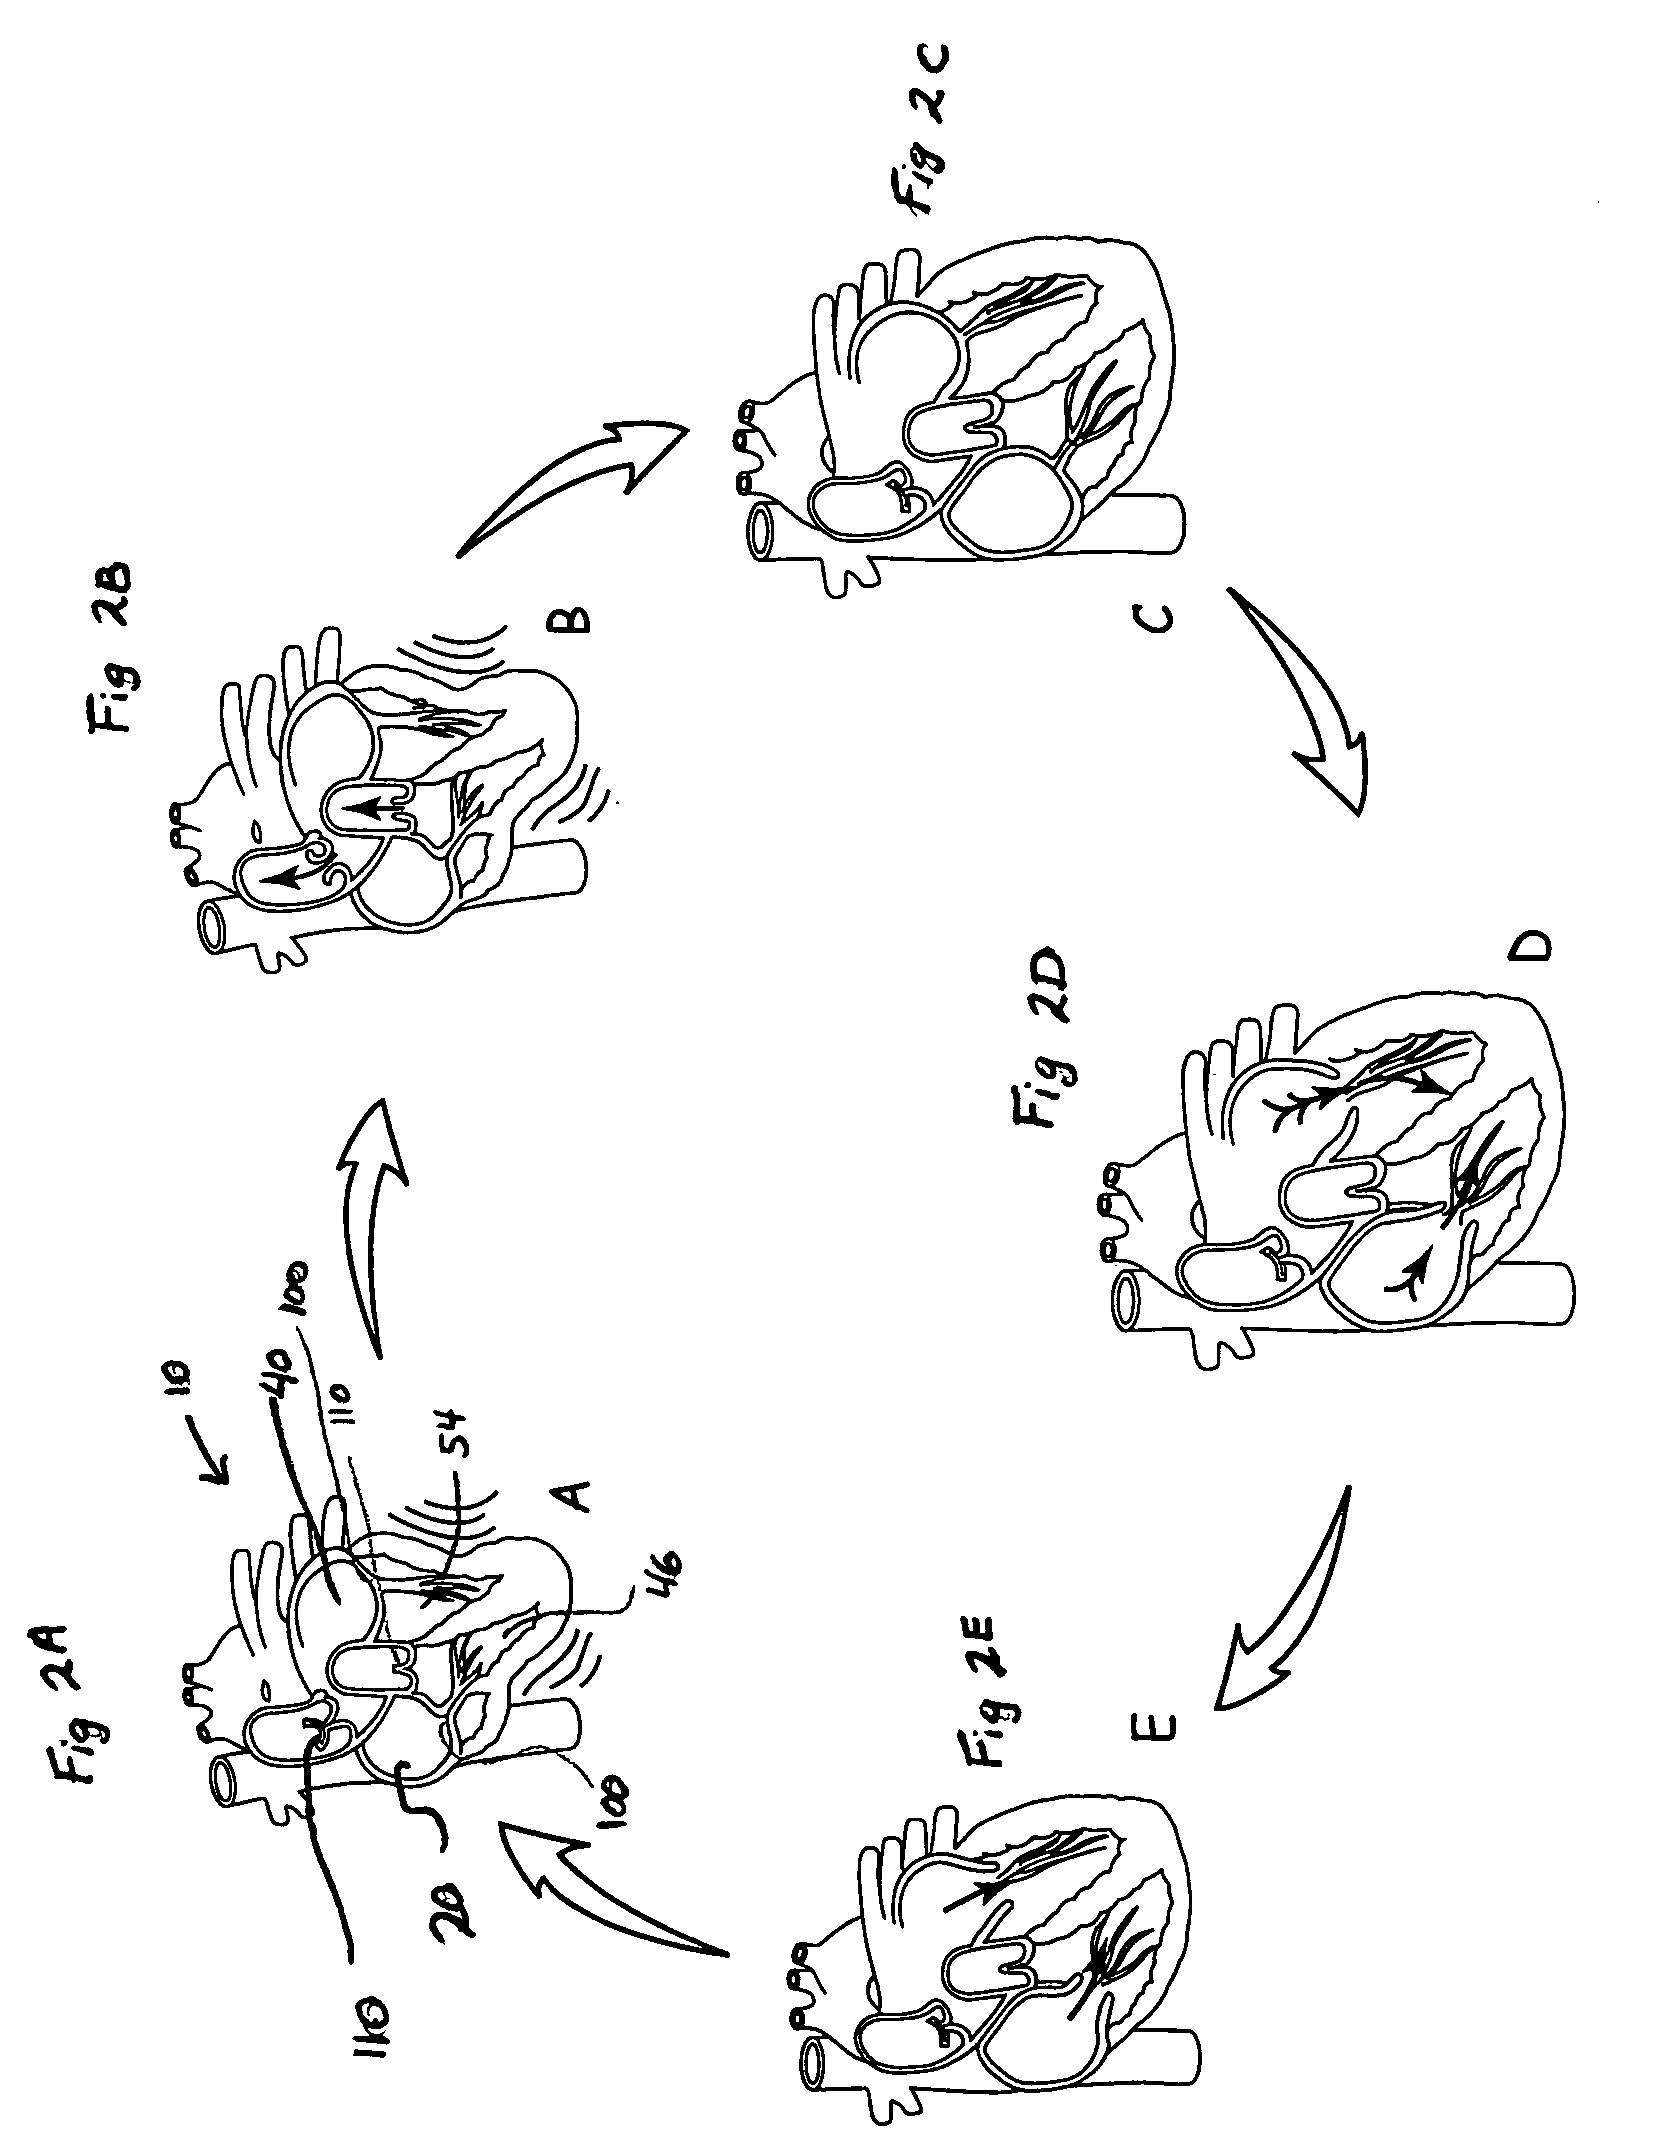 System and method of AV interval selection in an implantable medical device